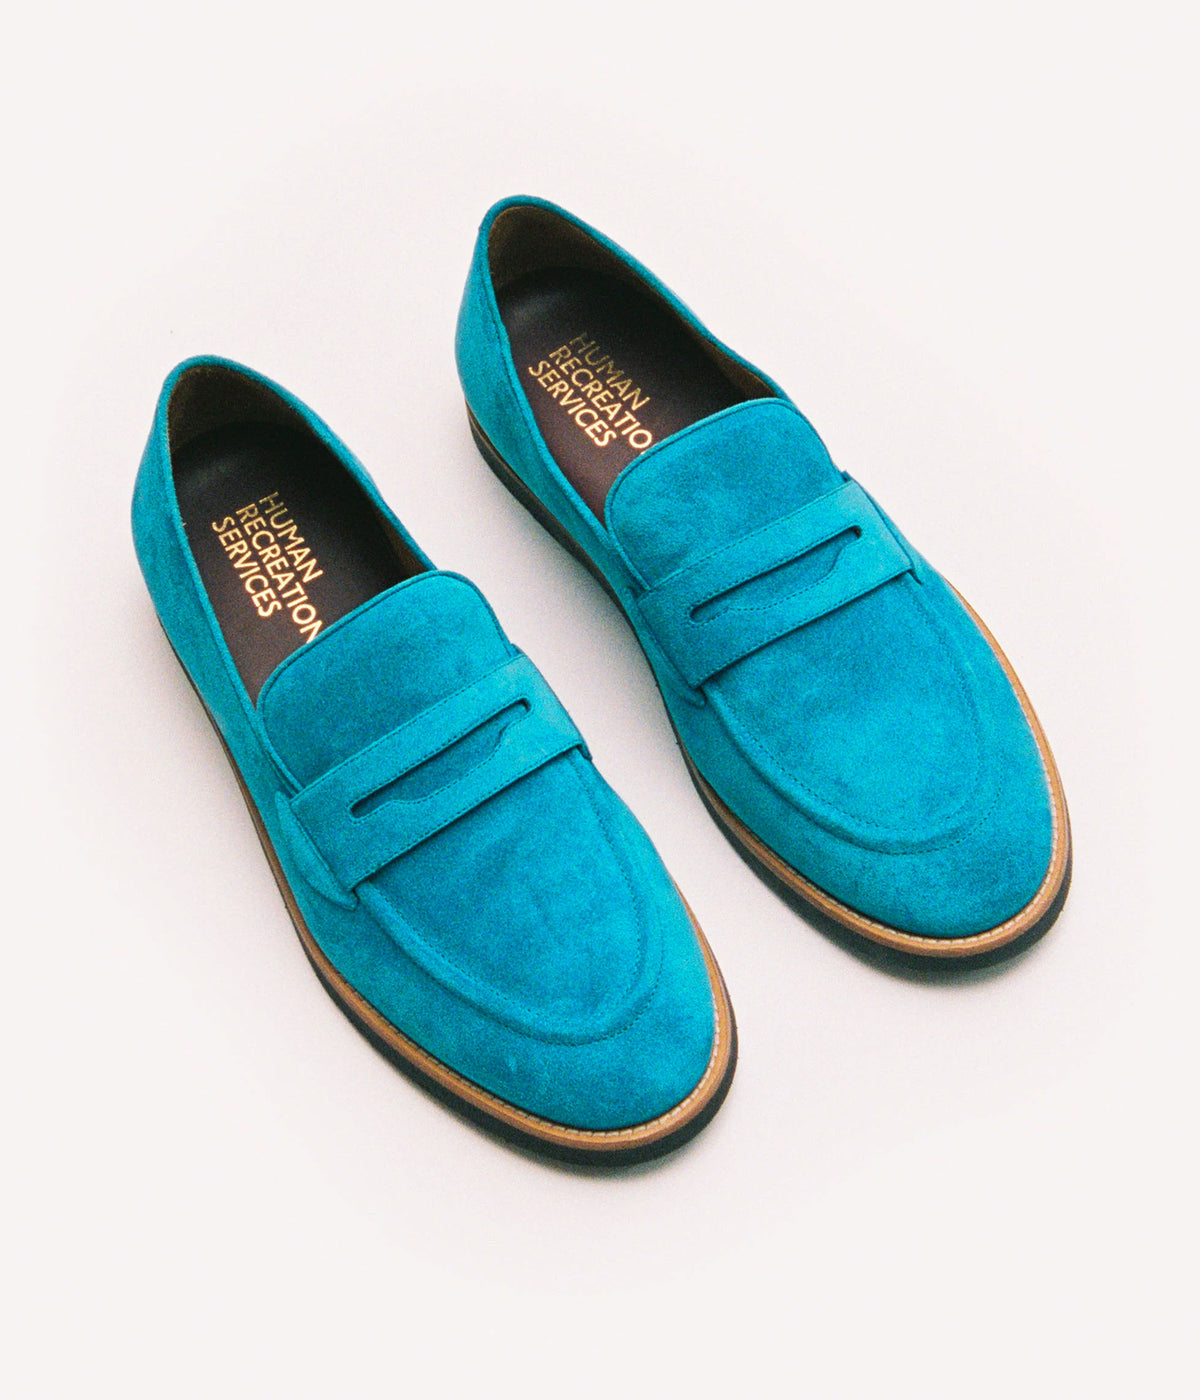 HUMAN RECREATIONAL SERVICES DEL REY TURQUOISE PENNY LOAFER IN ITALIAN SUEDE 